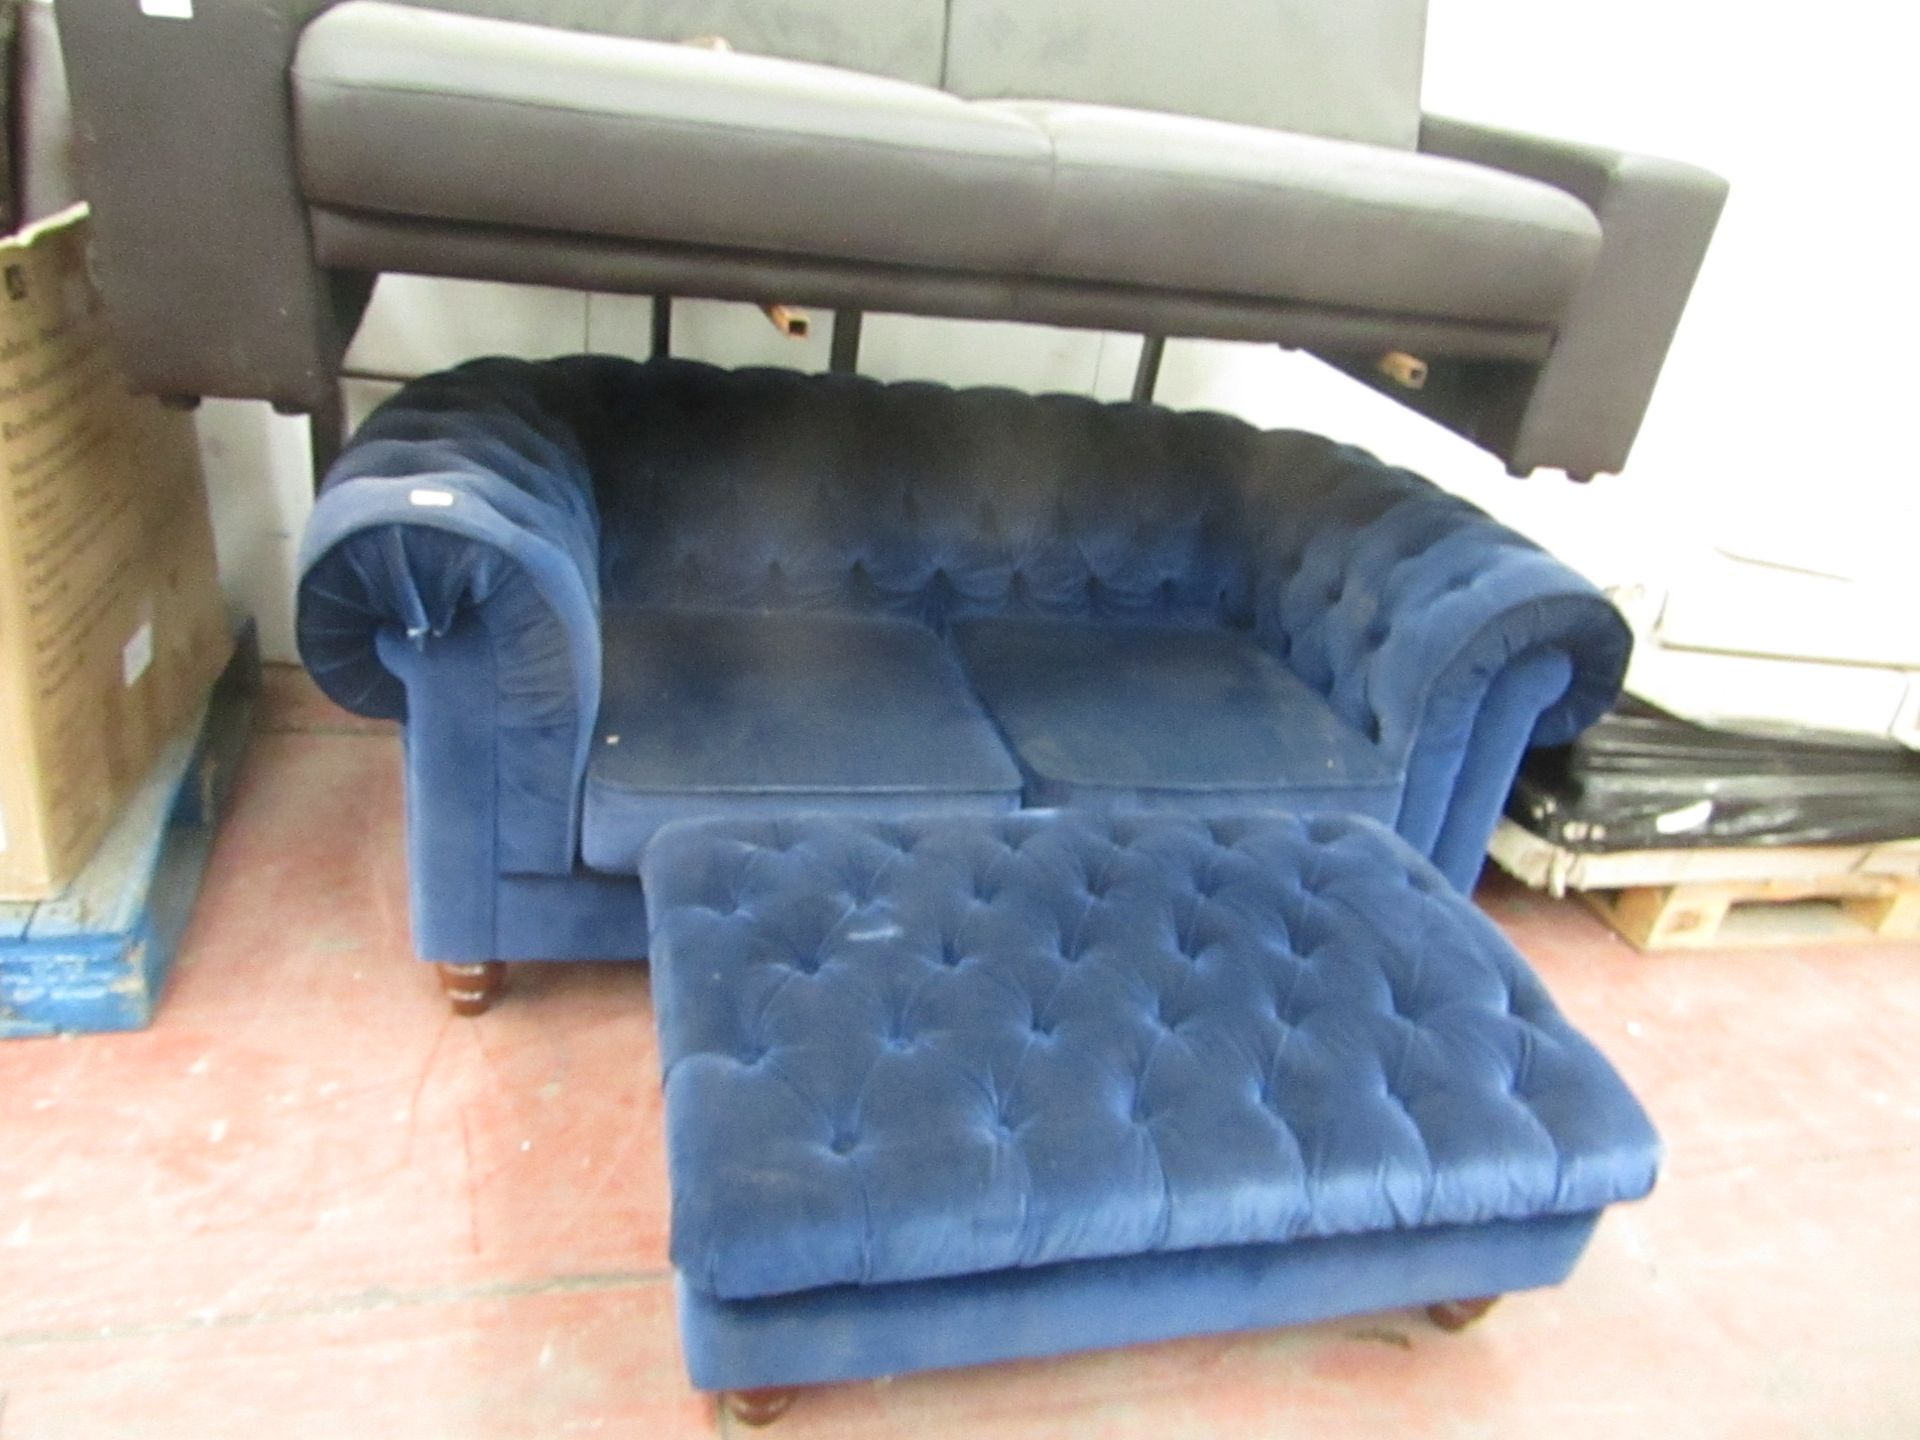 2 Seater Chester field stlye blue Velvet sofa with matching foot stool, the sofa has damage on one